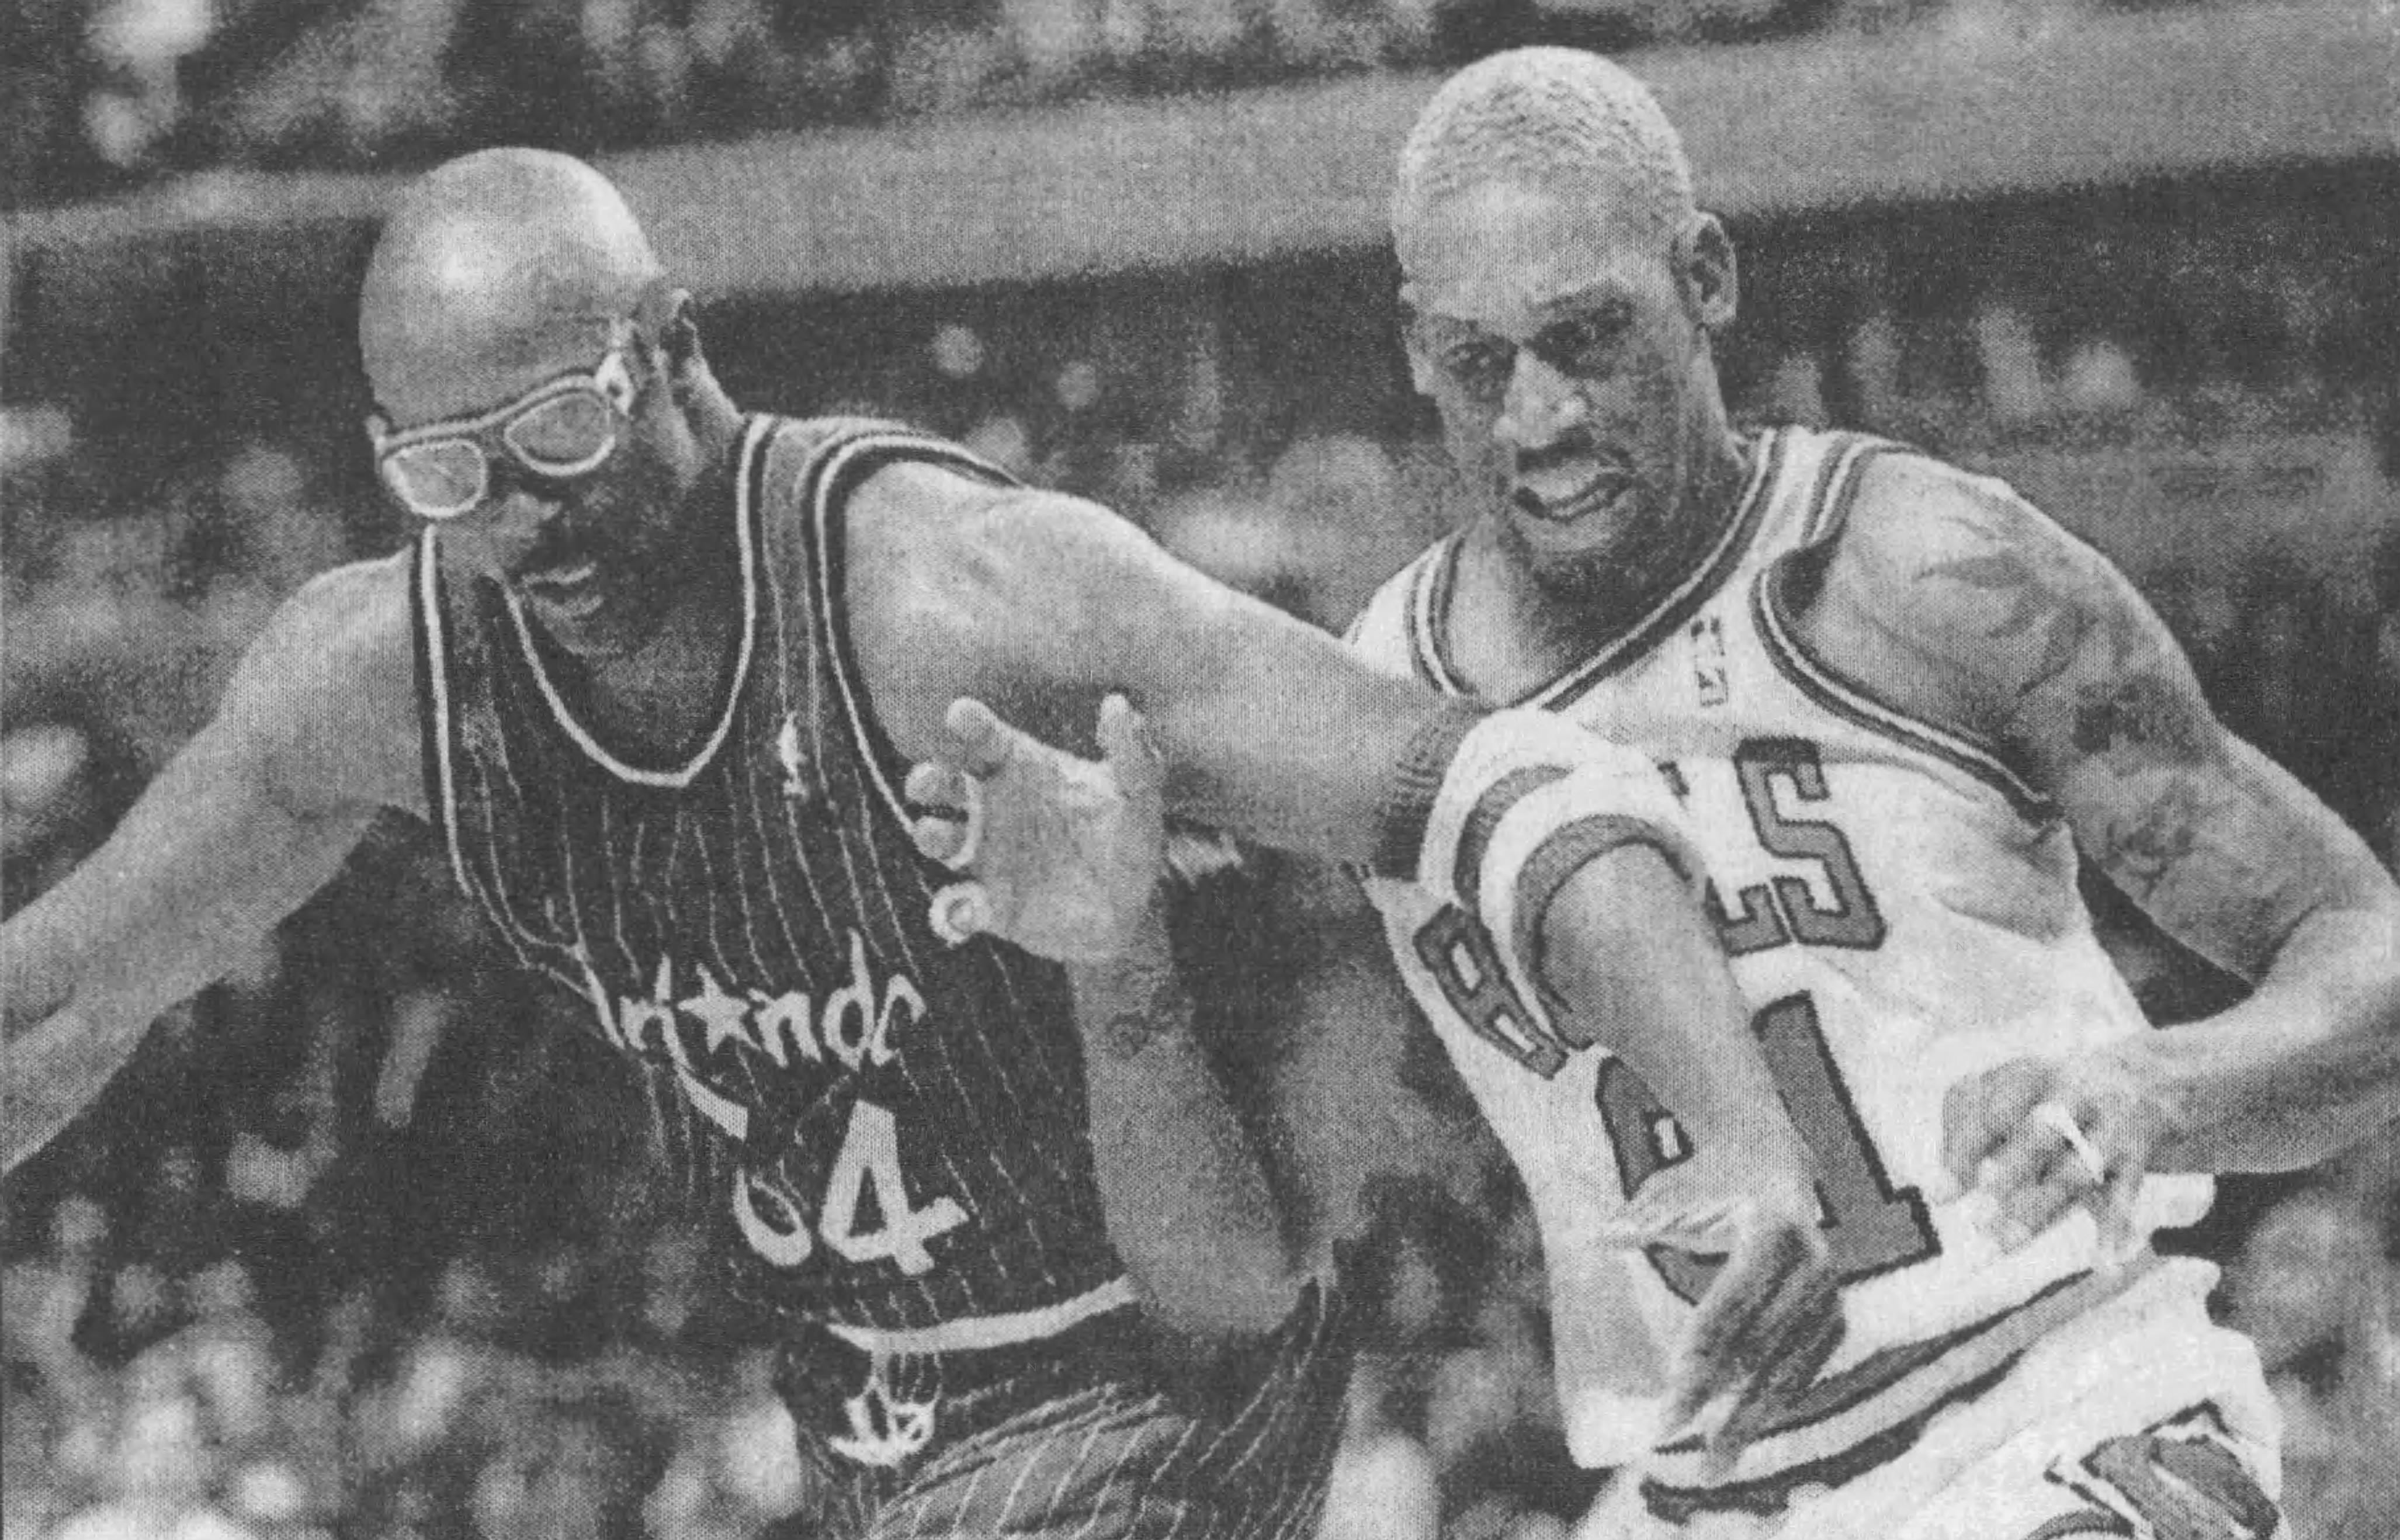 Did you know that Dennis Rodman once played for the LA Lakers? We look at  his stats, jersey number and more from that season